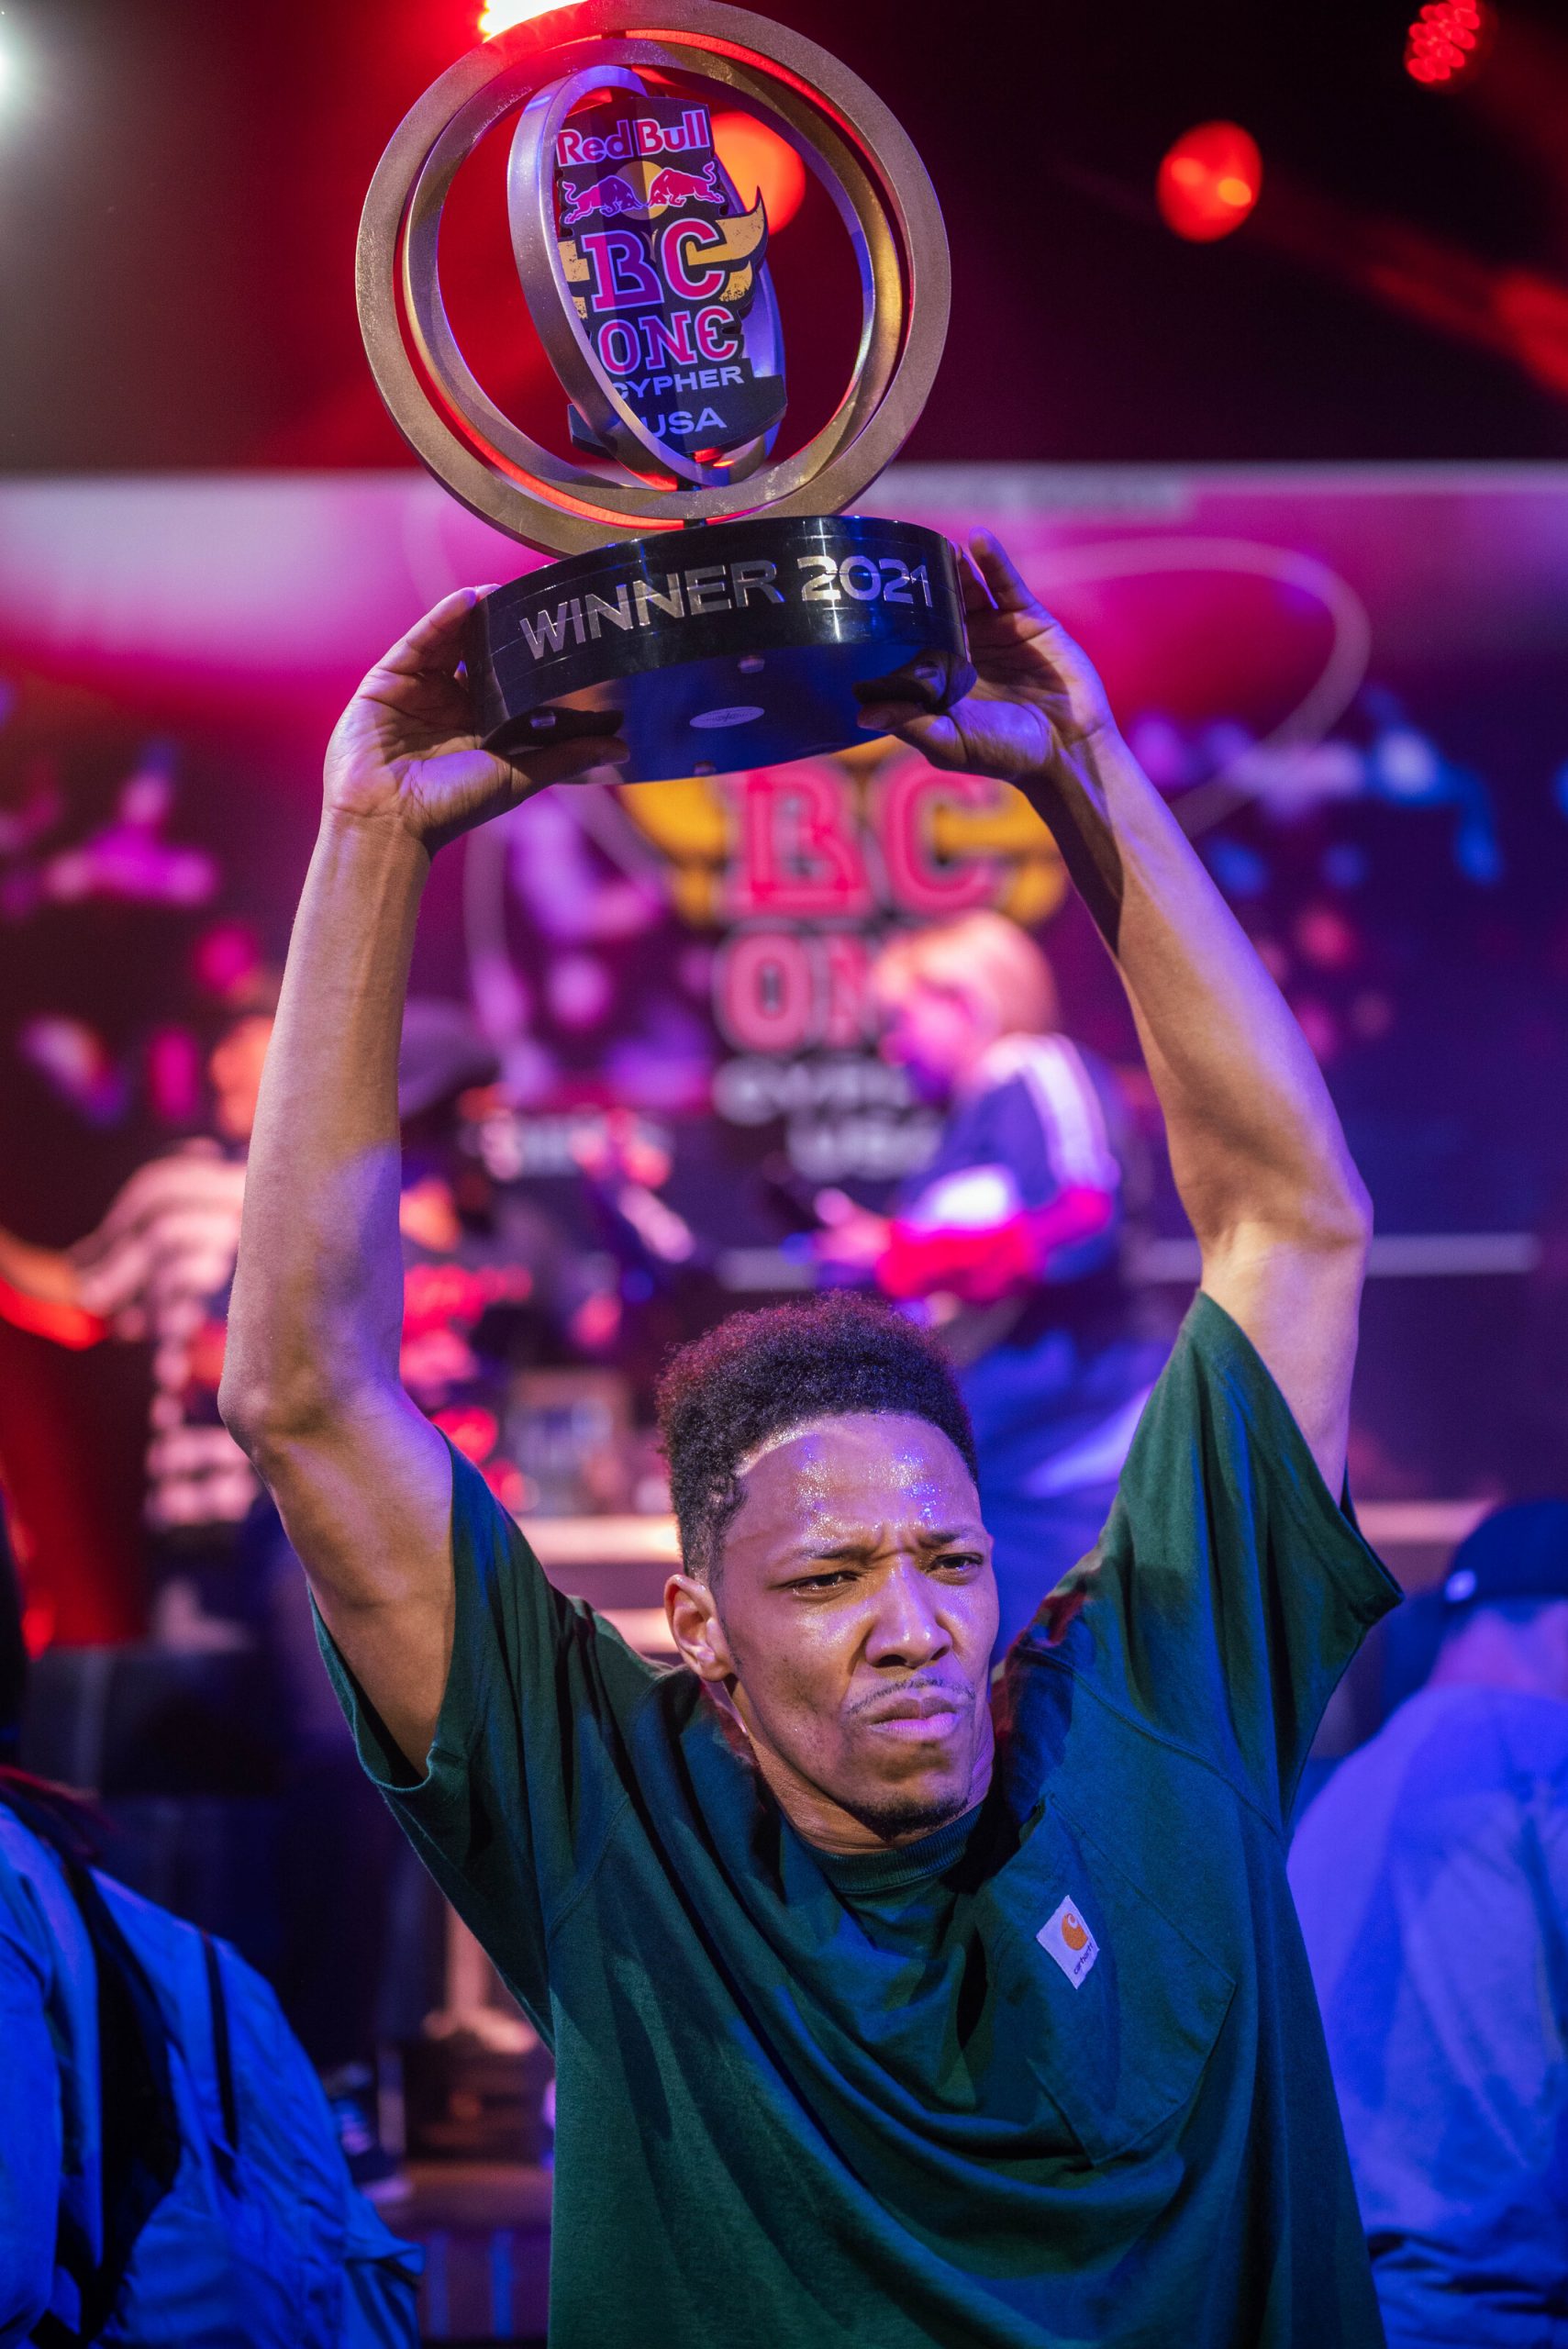 Event winner, Morris holds up his trophy at Red Bull BC One National Finals in Orlando, FL, USA on August 21, 2021